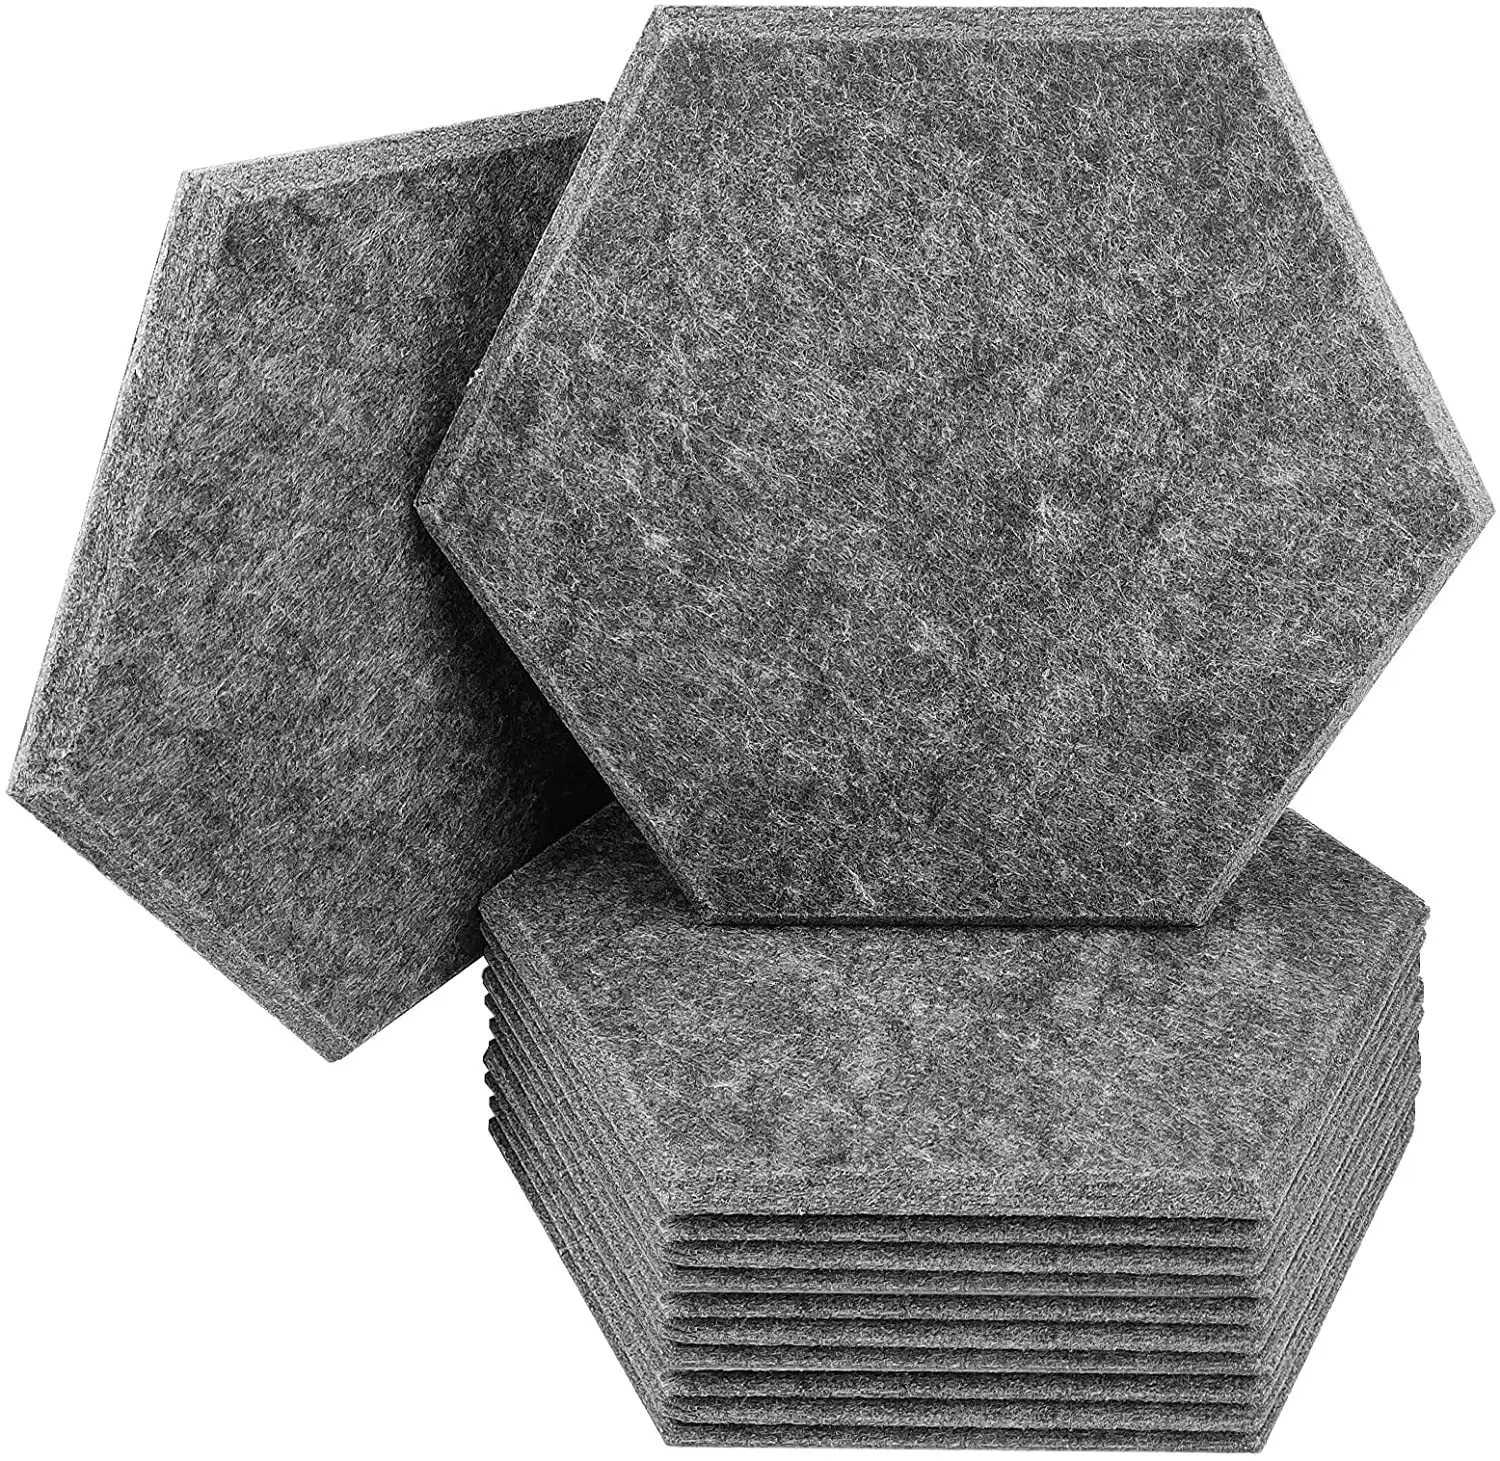 Acoustic Panel for Hexagon Wall Covering